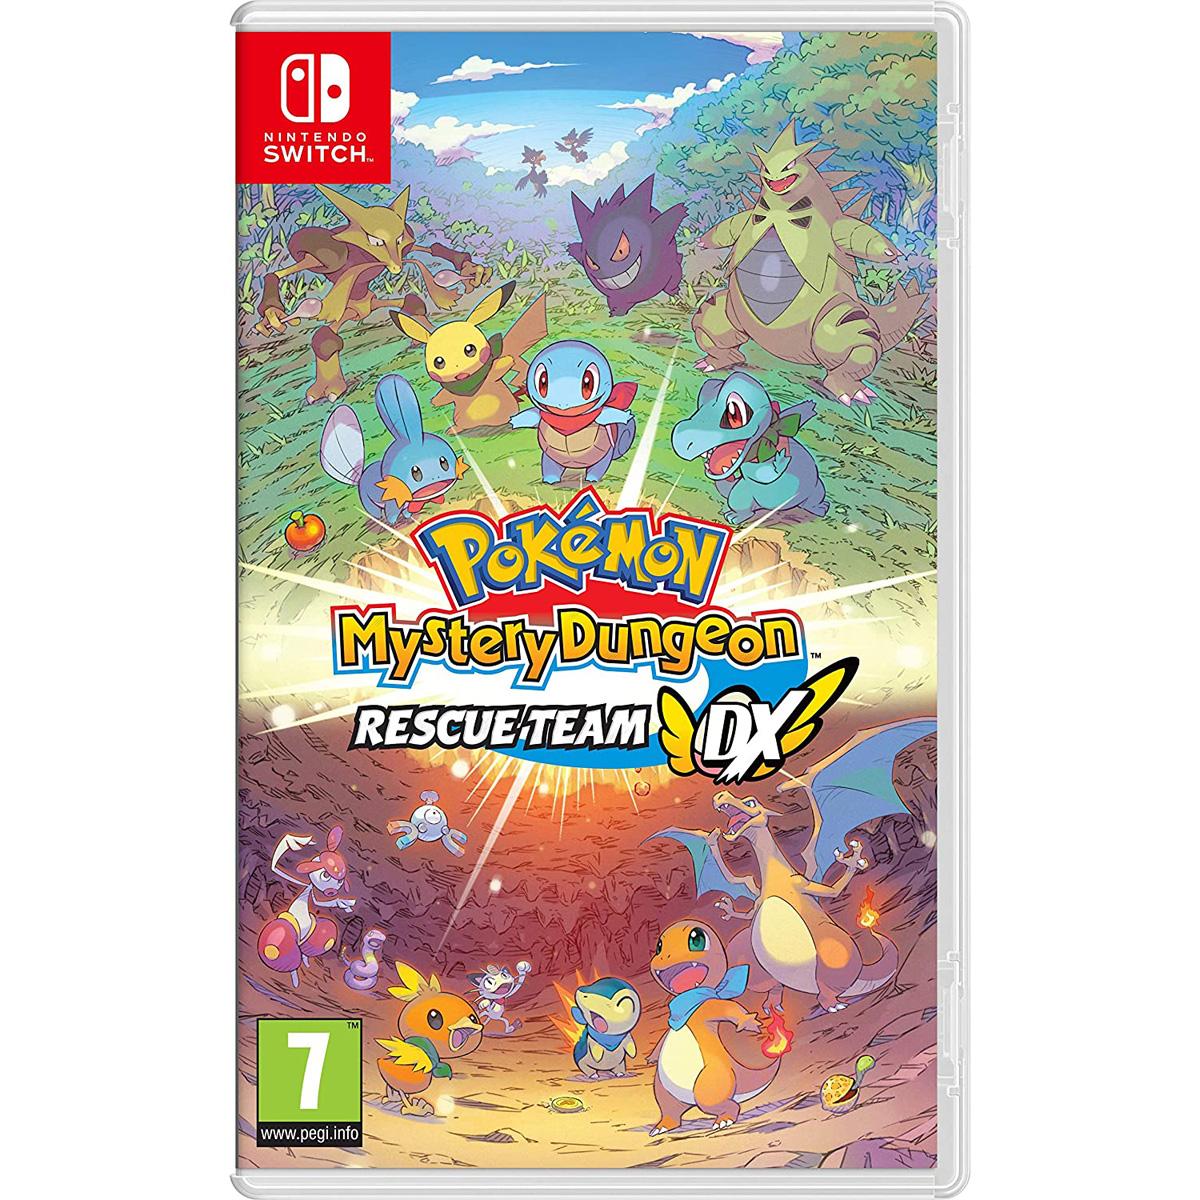 Pokemon Mystery Dungeon: Rescue Team Dx Nintendo Switch for $44.99 Shipped